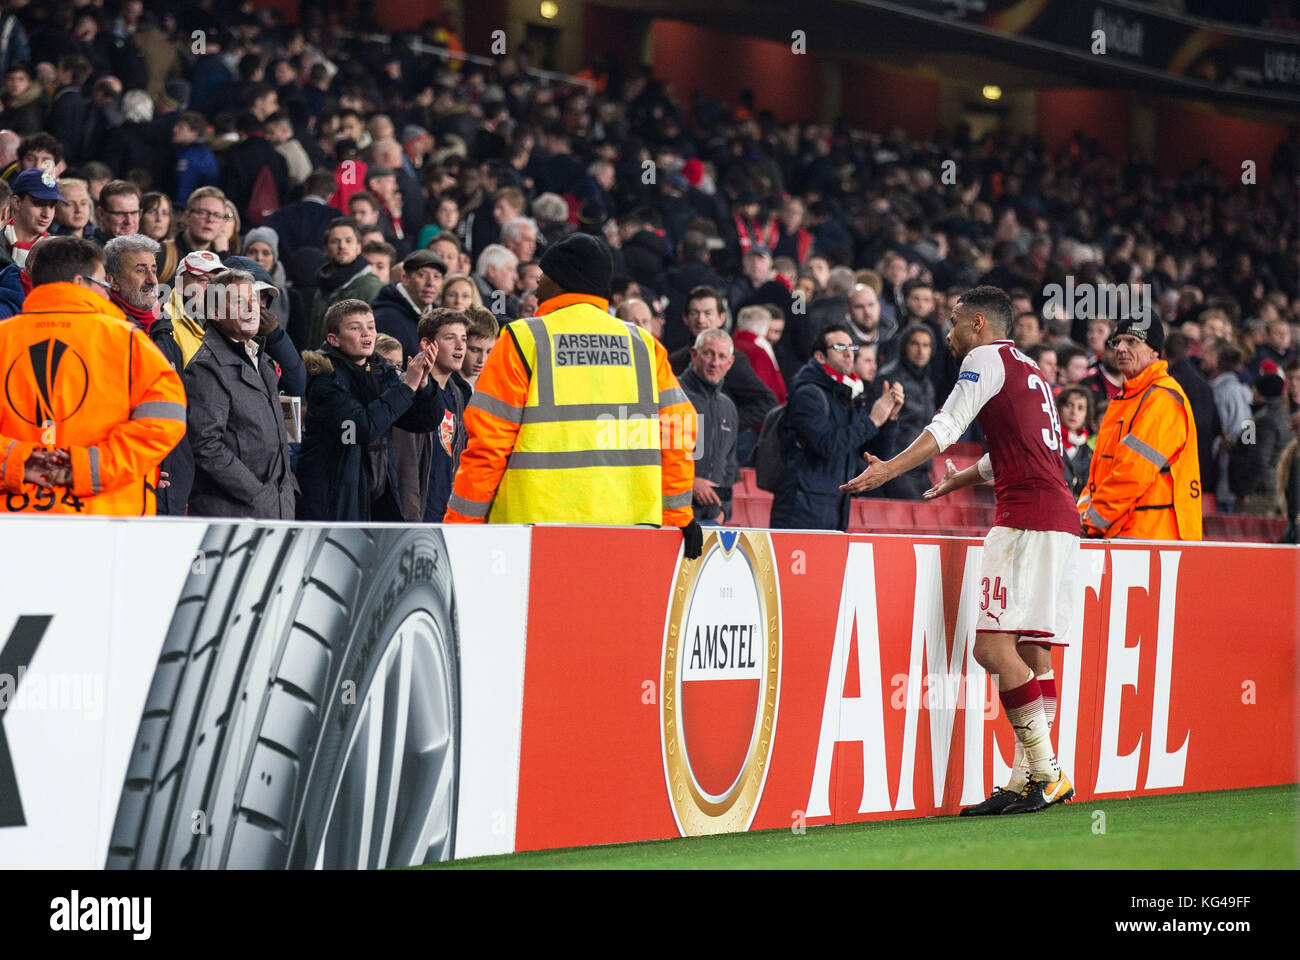 London, UK. 02nd Nov, 2017. Francis Coquelin of Arsenal confront unhappy supporters at full time during the UEFA Europa League group stage match between Arsenal and FC Red Star Belgrade at the Emirates Stadium, London, England on 2 November 2017. Photo by Andy Rowland. Credit: Andrew Rowland/Alamy Live News Stock Photo